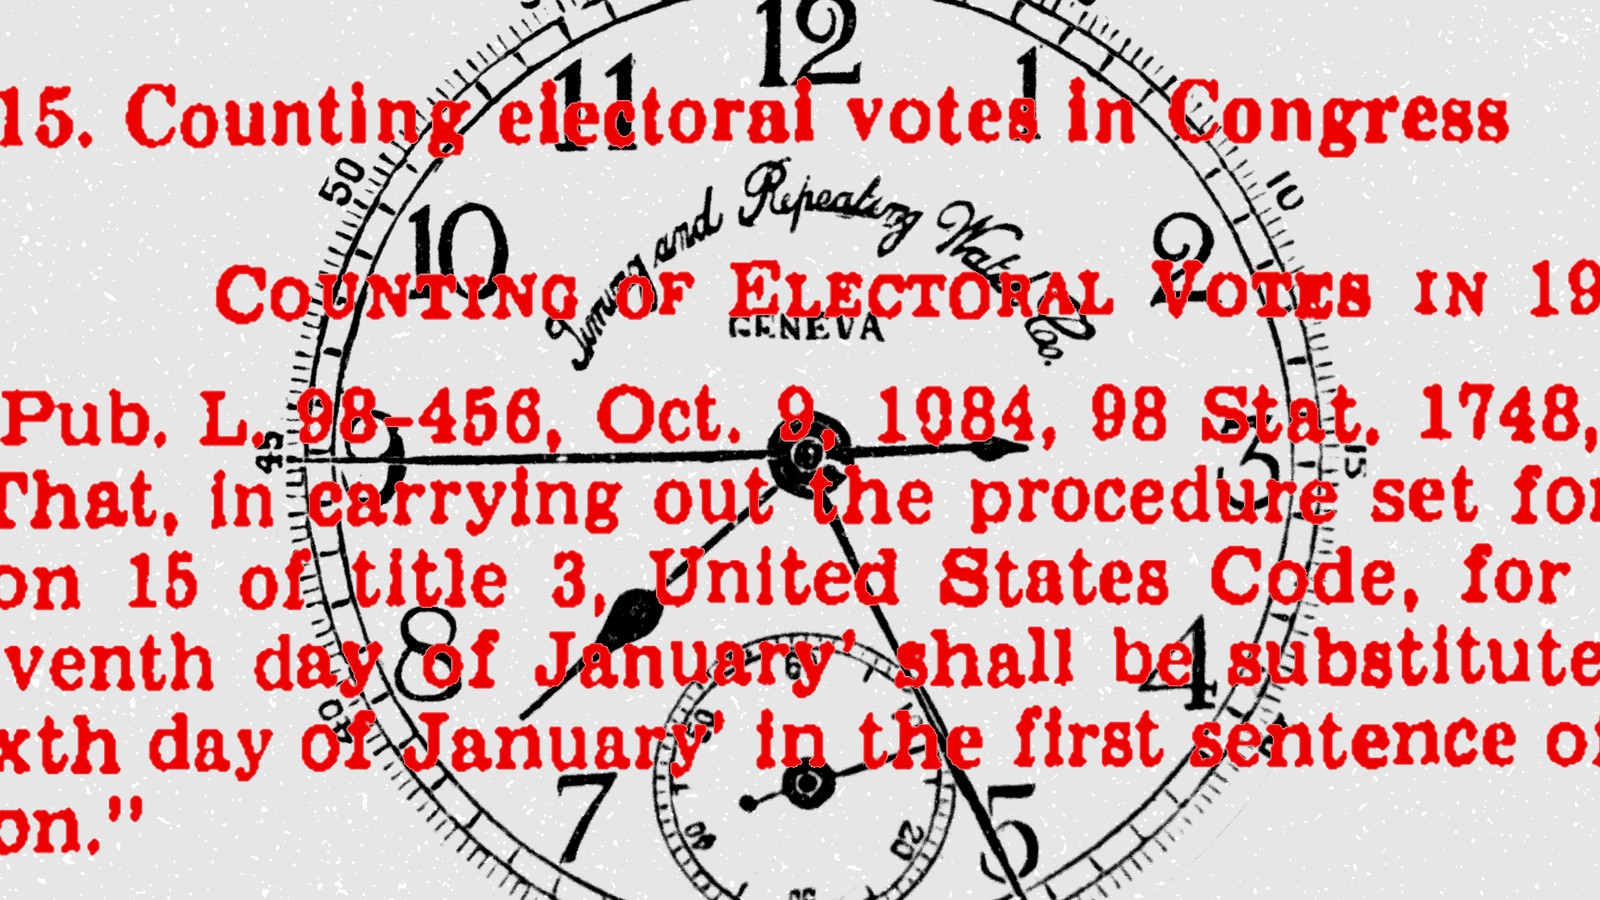 Electoral Count Act of 1887